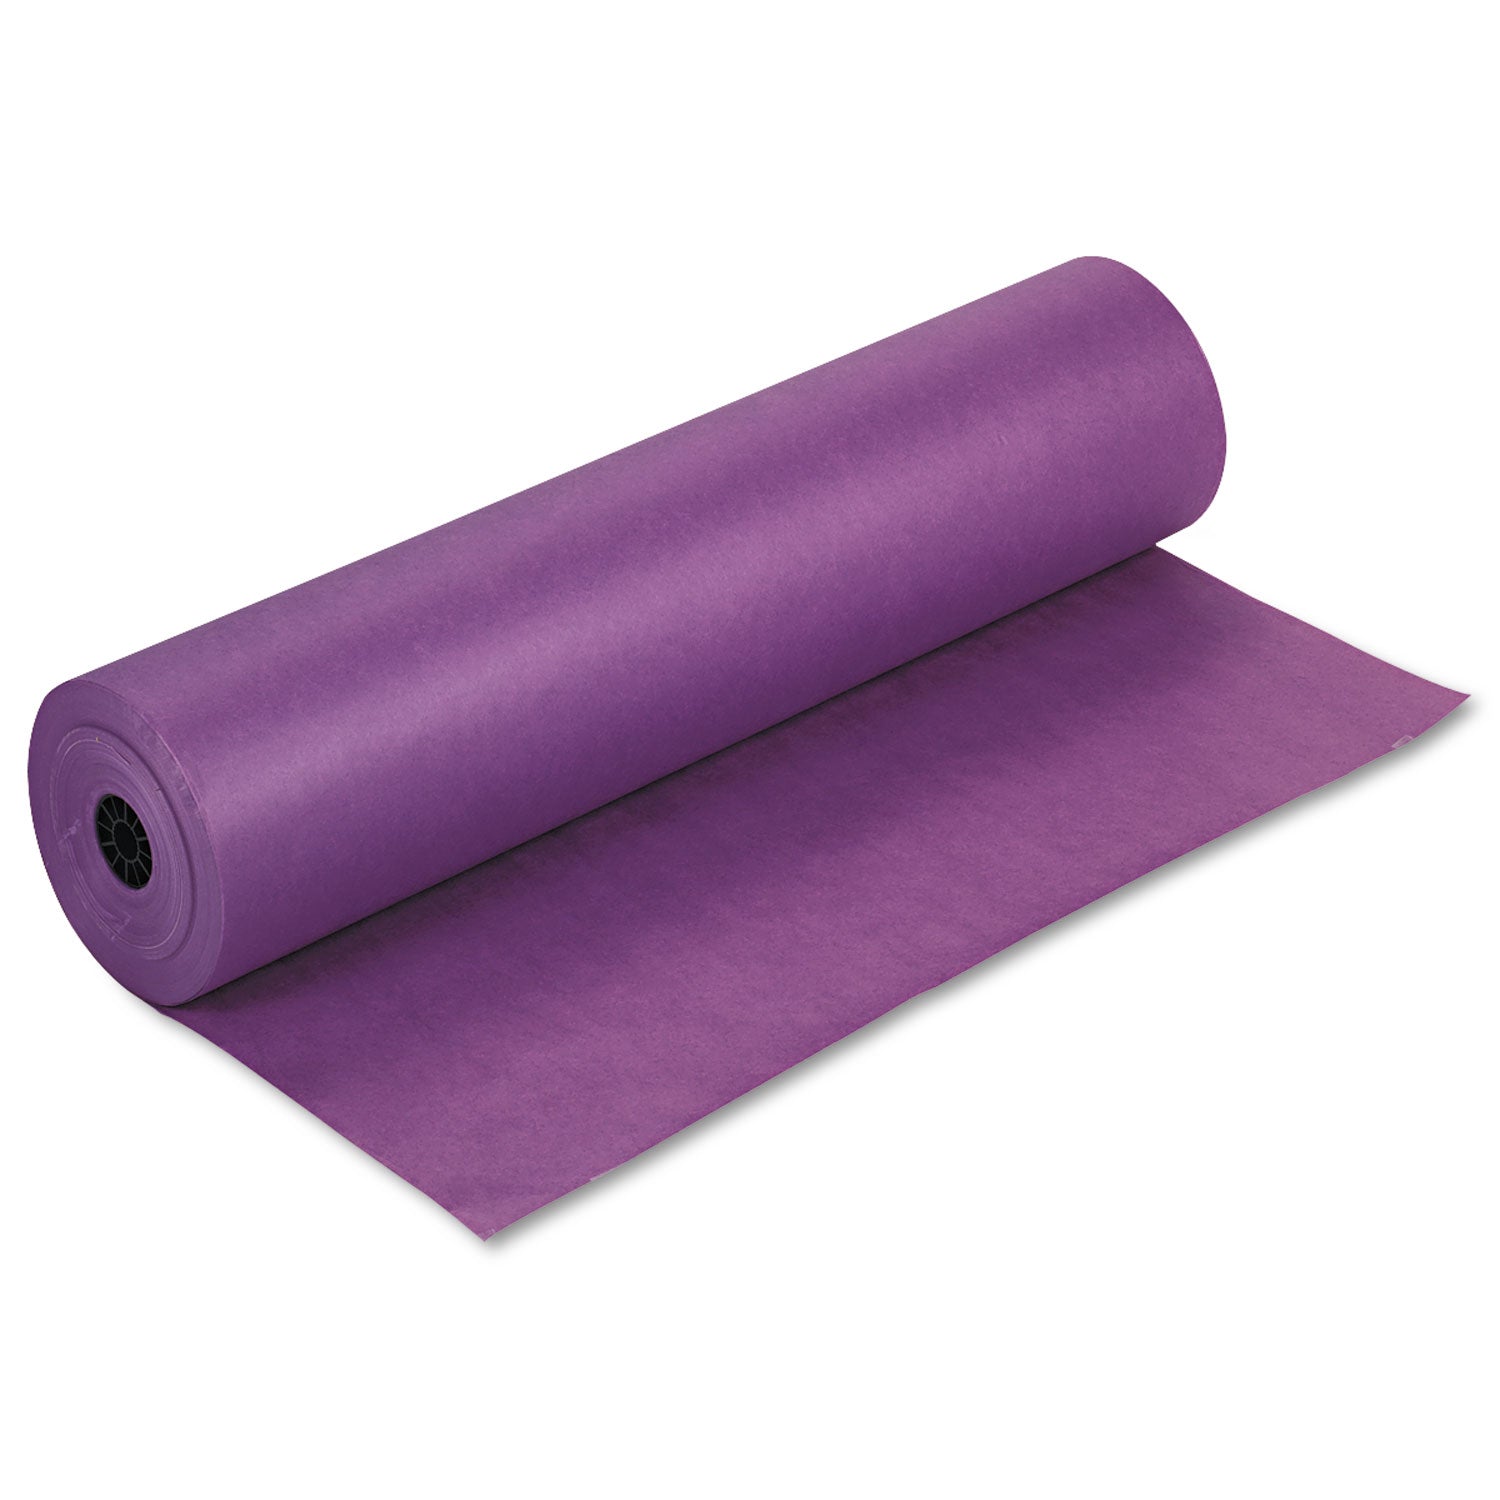 spectra-artkraft-duo-finish-paper-48-lb-text-weight-36-x-1000-ft-purple_pac67331 - 1